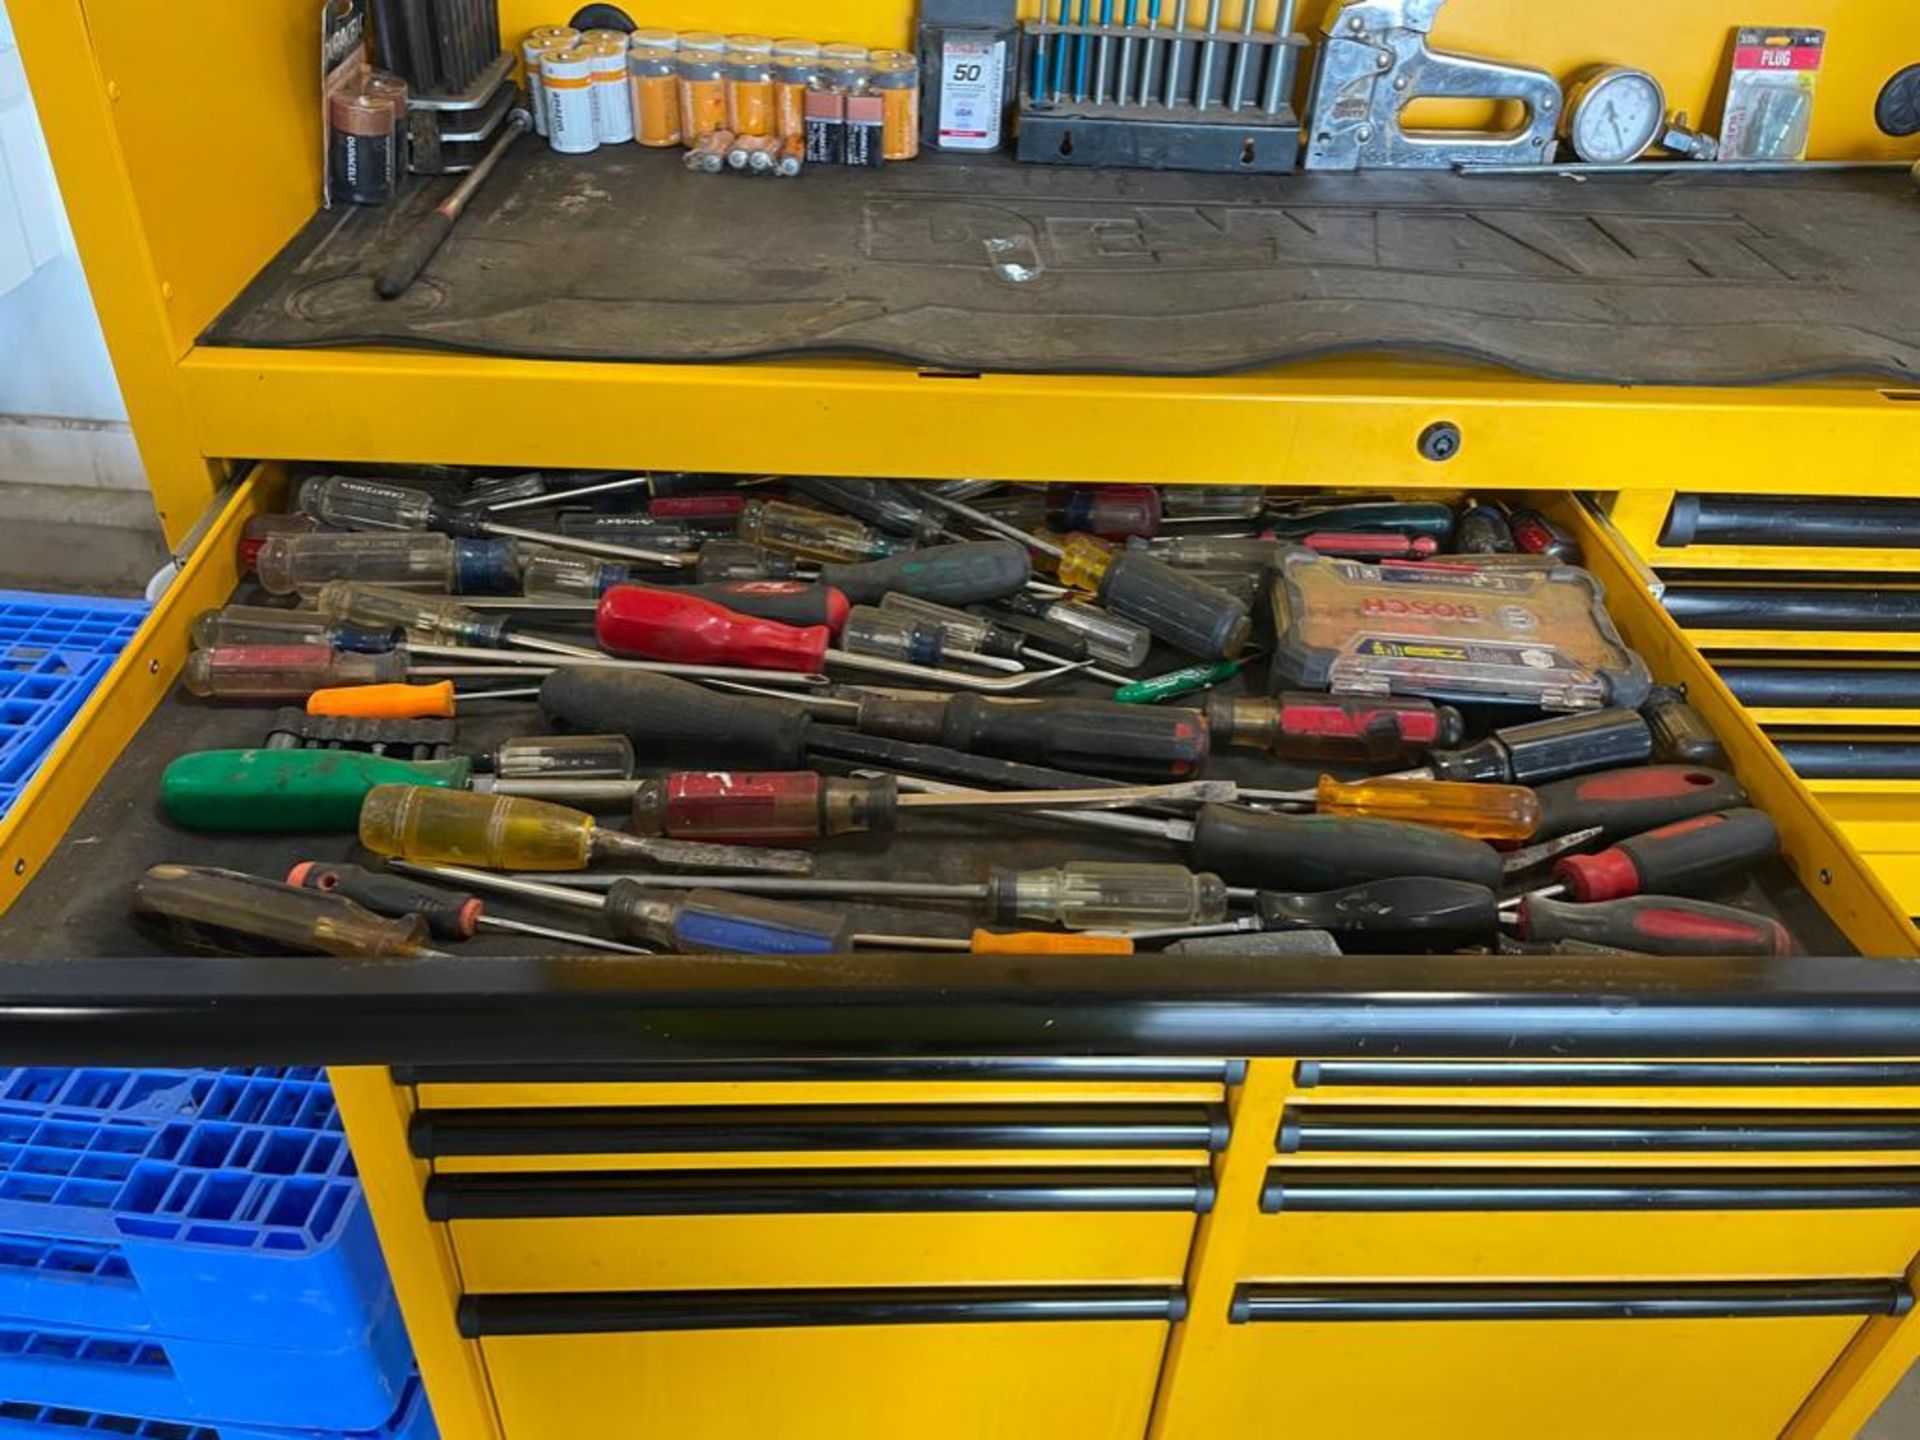 DeWalt Mechanics Tool Box with Contents, Wrenches, Sockets, Plyers, Pipe Wrench, Screwdrivers, etc. - Image 7 of 24